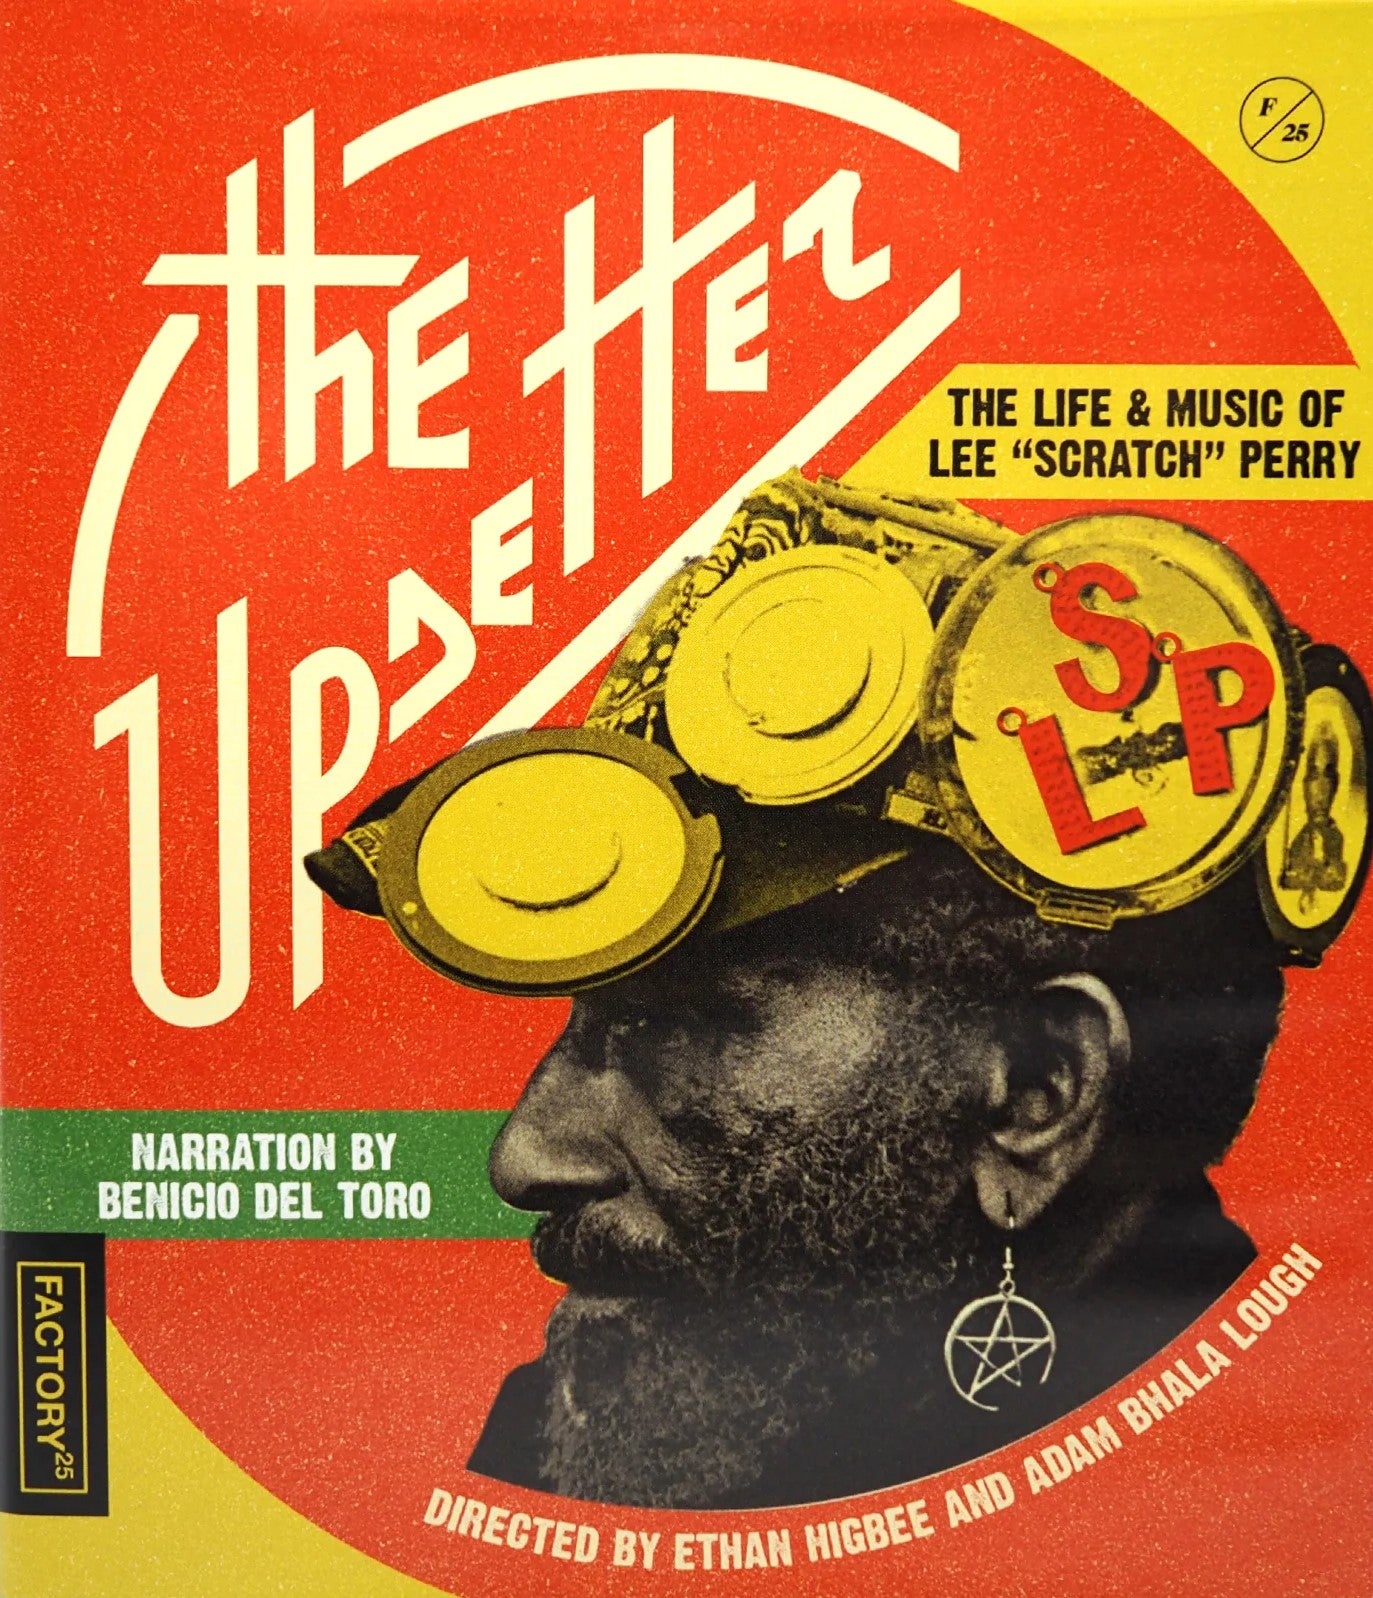 THE UPSETTER: THE LIFE AND MUSIC OF LEE SCRATCH PERRY BLU-RAY